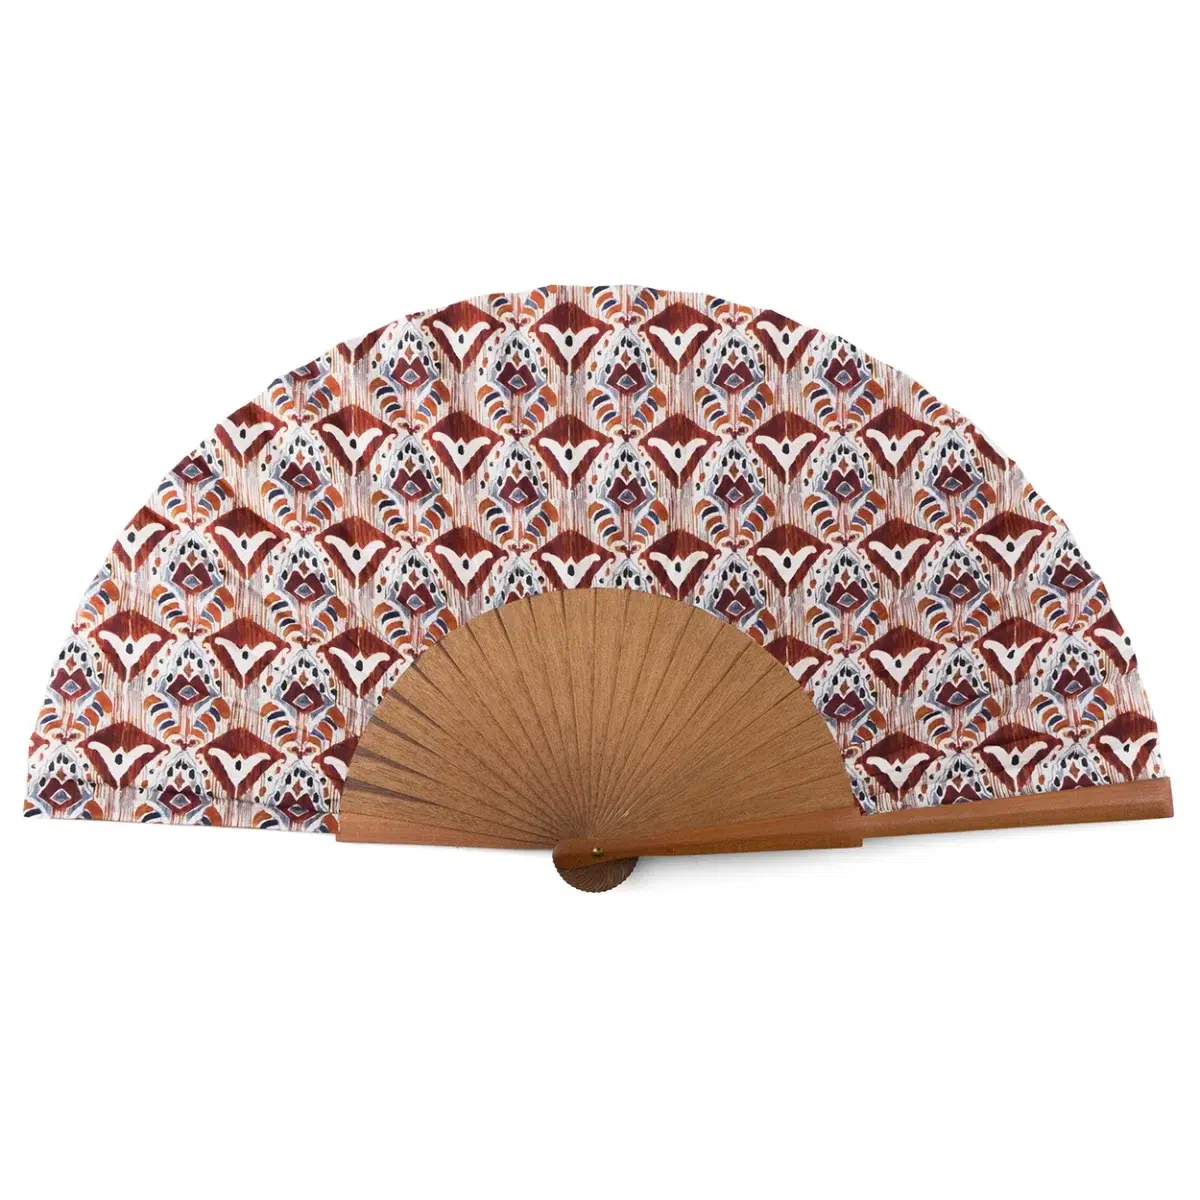 Handcrafted White and Red Silk Fan Made in Spain with Natural Bocapi Wood.